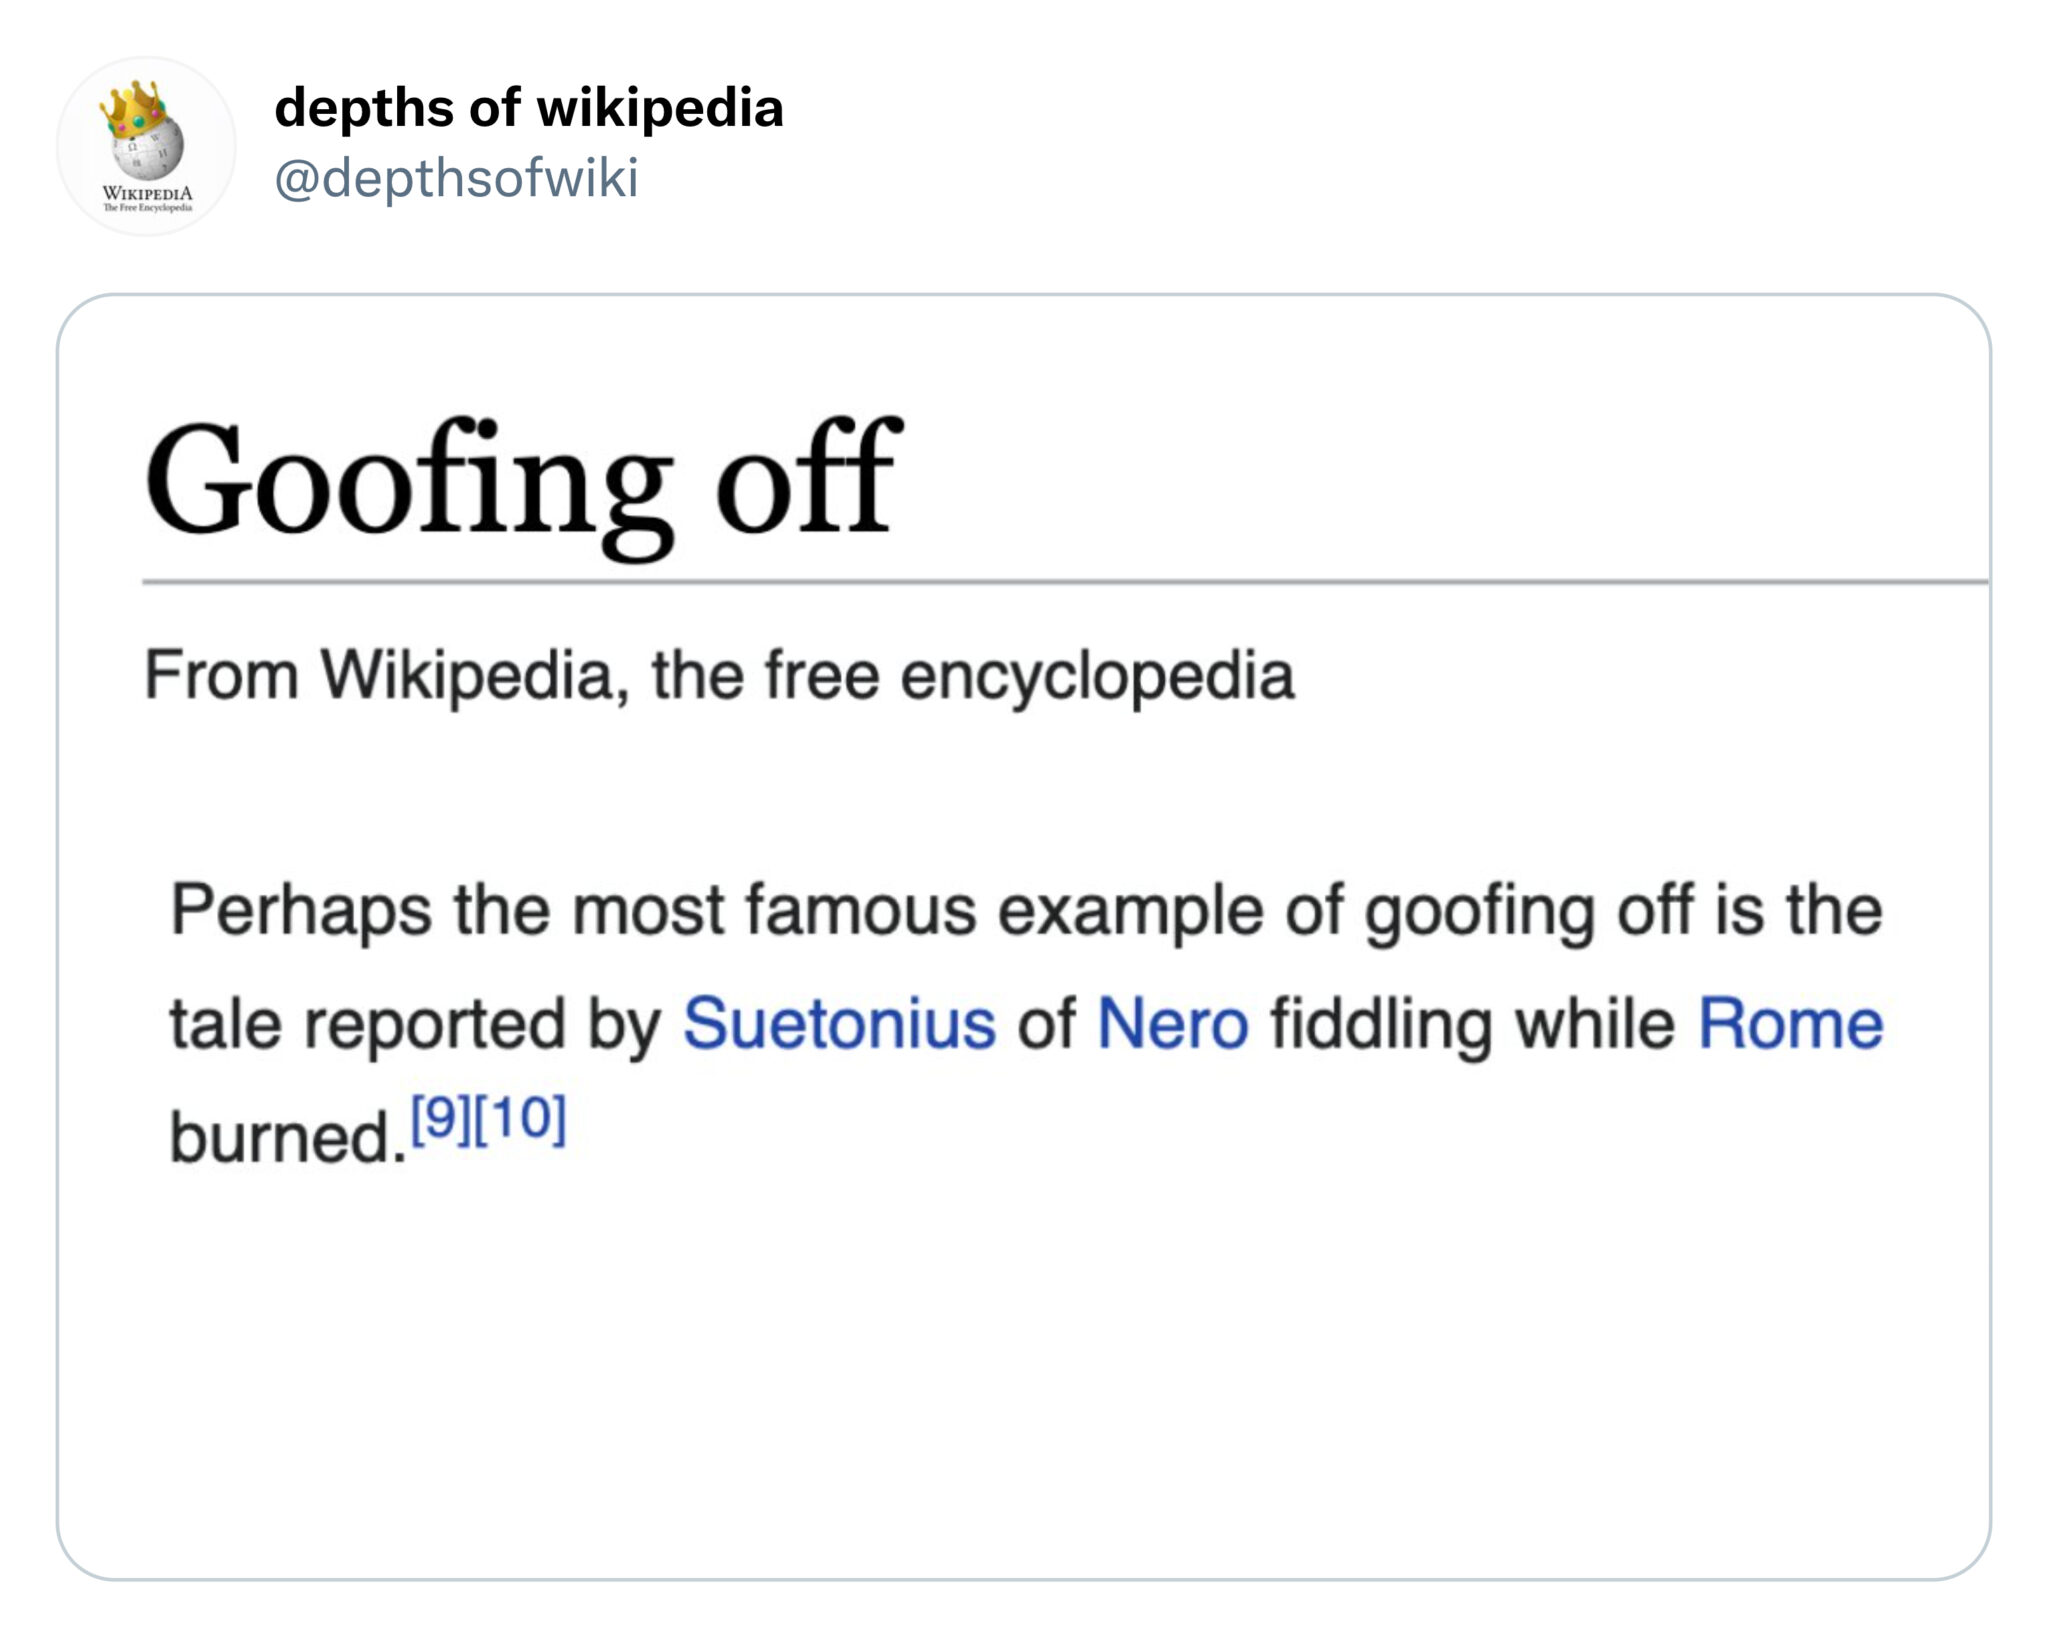 Funny Tweets - depths of wikipedia Wikipedia The Free Encyclopedia Goofing off From Wikipedia, the free encyclopedia Perhaps the most famous example of goofing off is the tale reported by Suetonius of Nero fiddling while Rome burned.